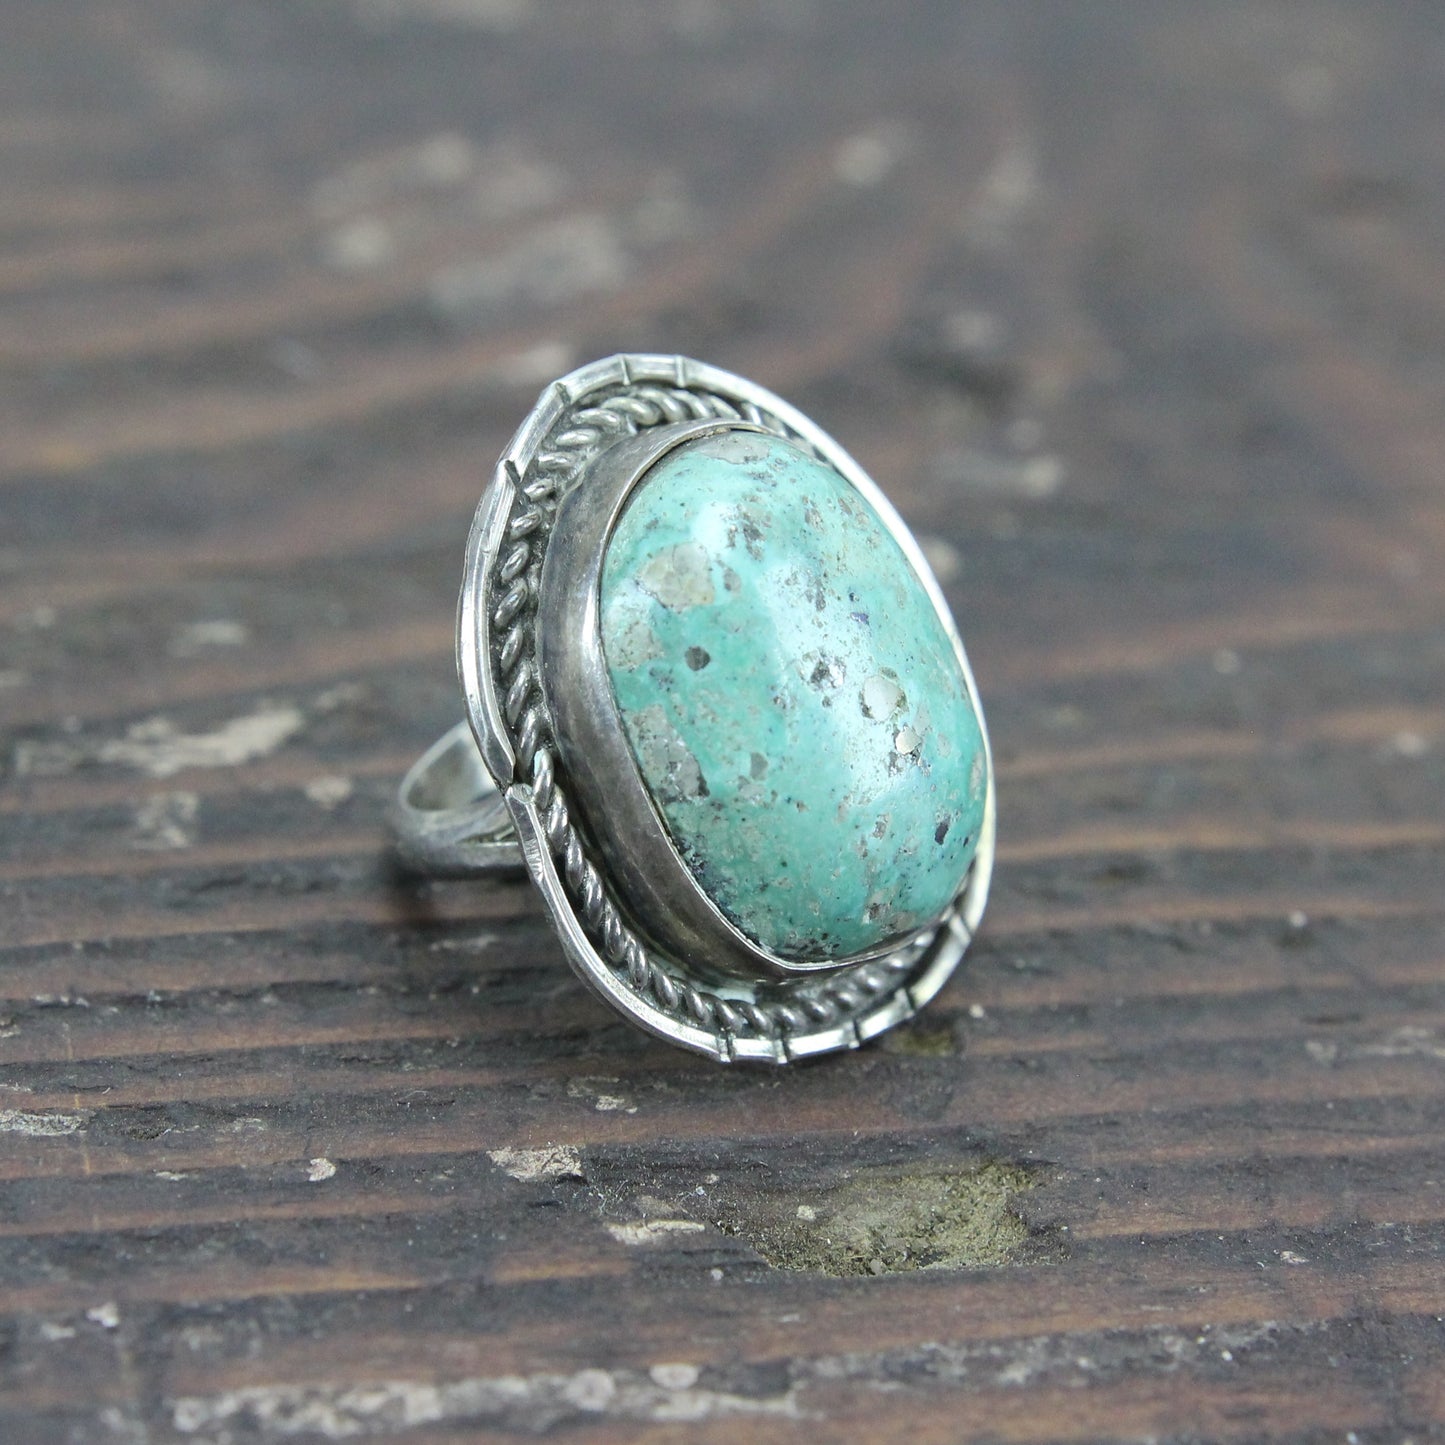 Native American Southwest Sterling Silver Ring with Large Turquoise - Size 7.5